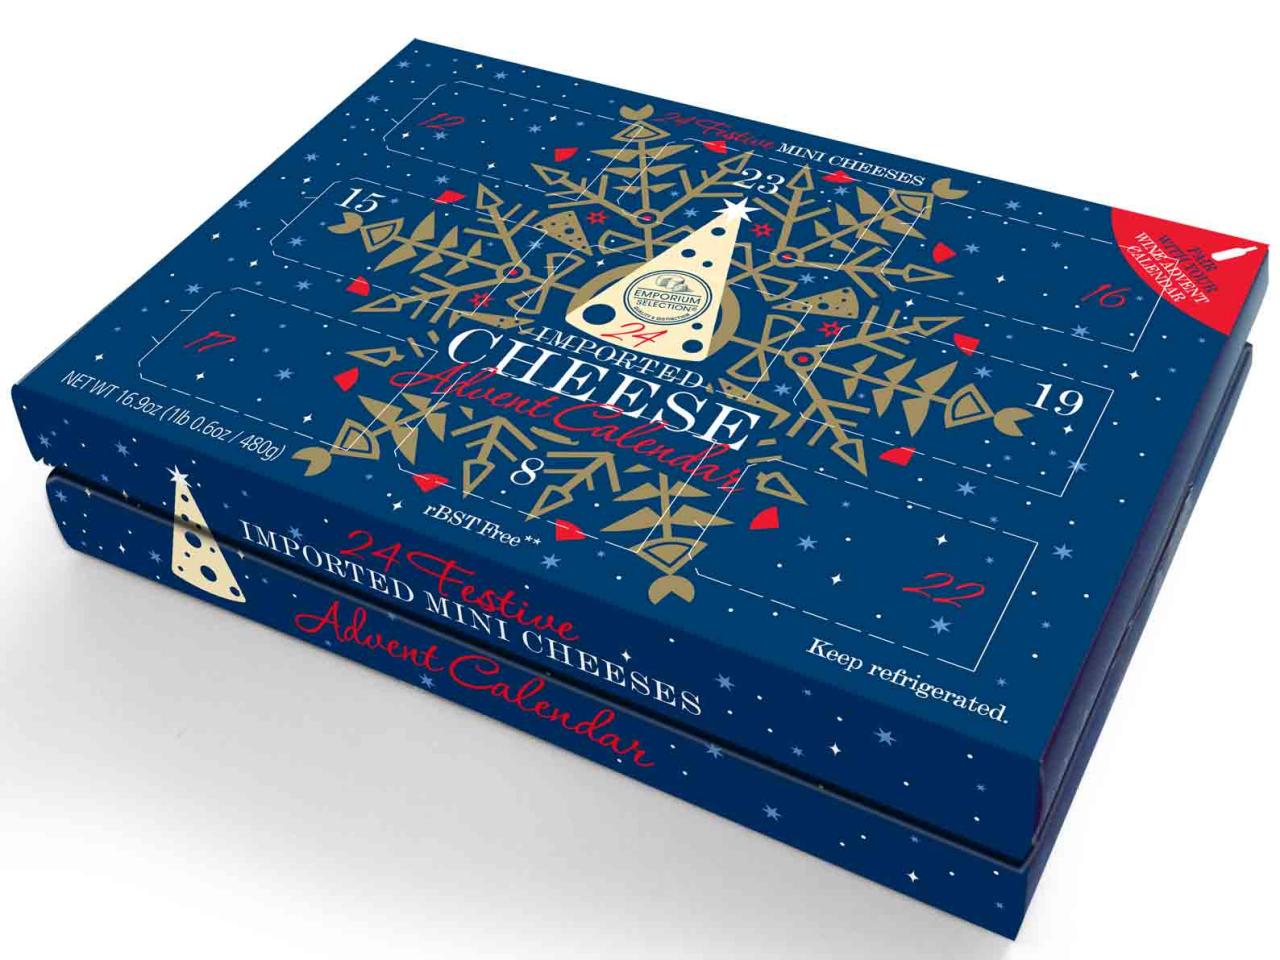 Aldi s Wine and Cheese Advent Calendars Are Back to Make Your Holiday